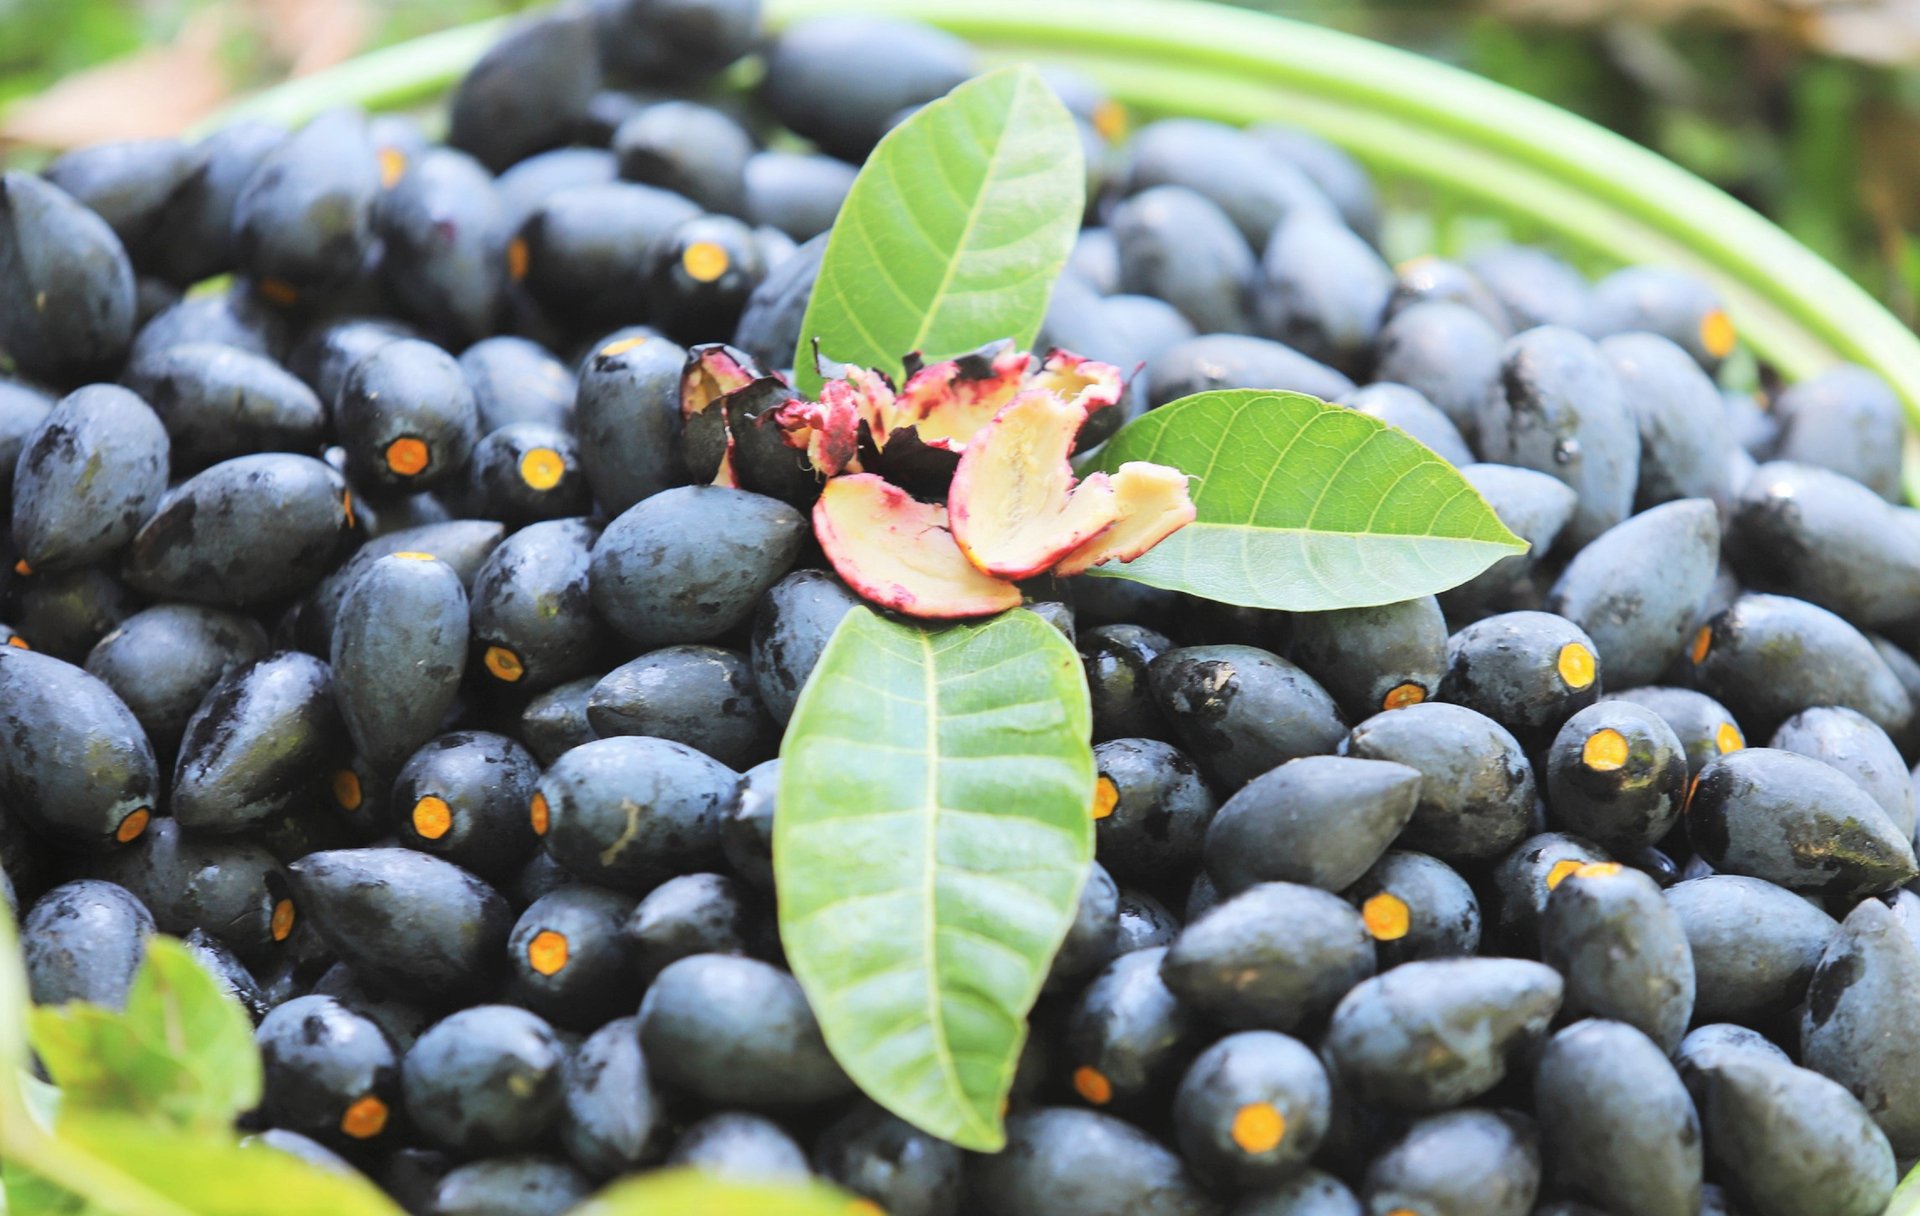 Black olives are currently a specialty food of the people in Ha Tinh province, and they are even brought by Vietnamese individuals overseas to savor the taste of their homeland.